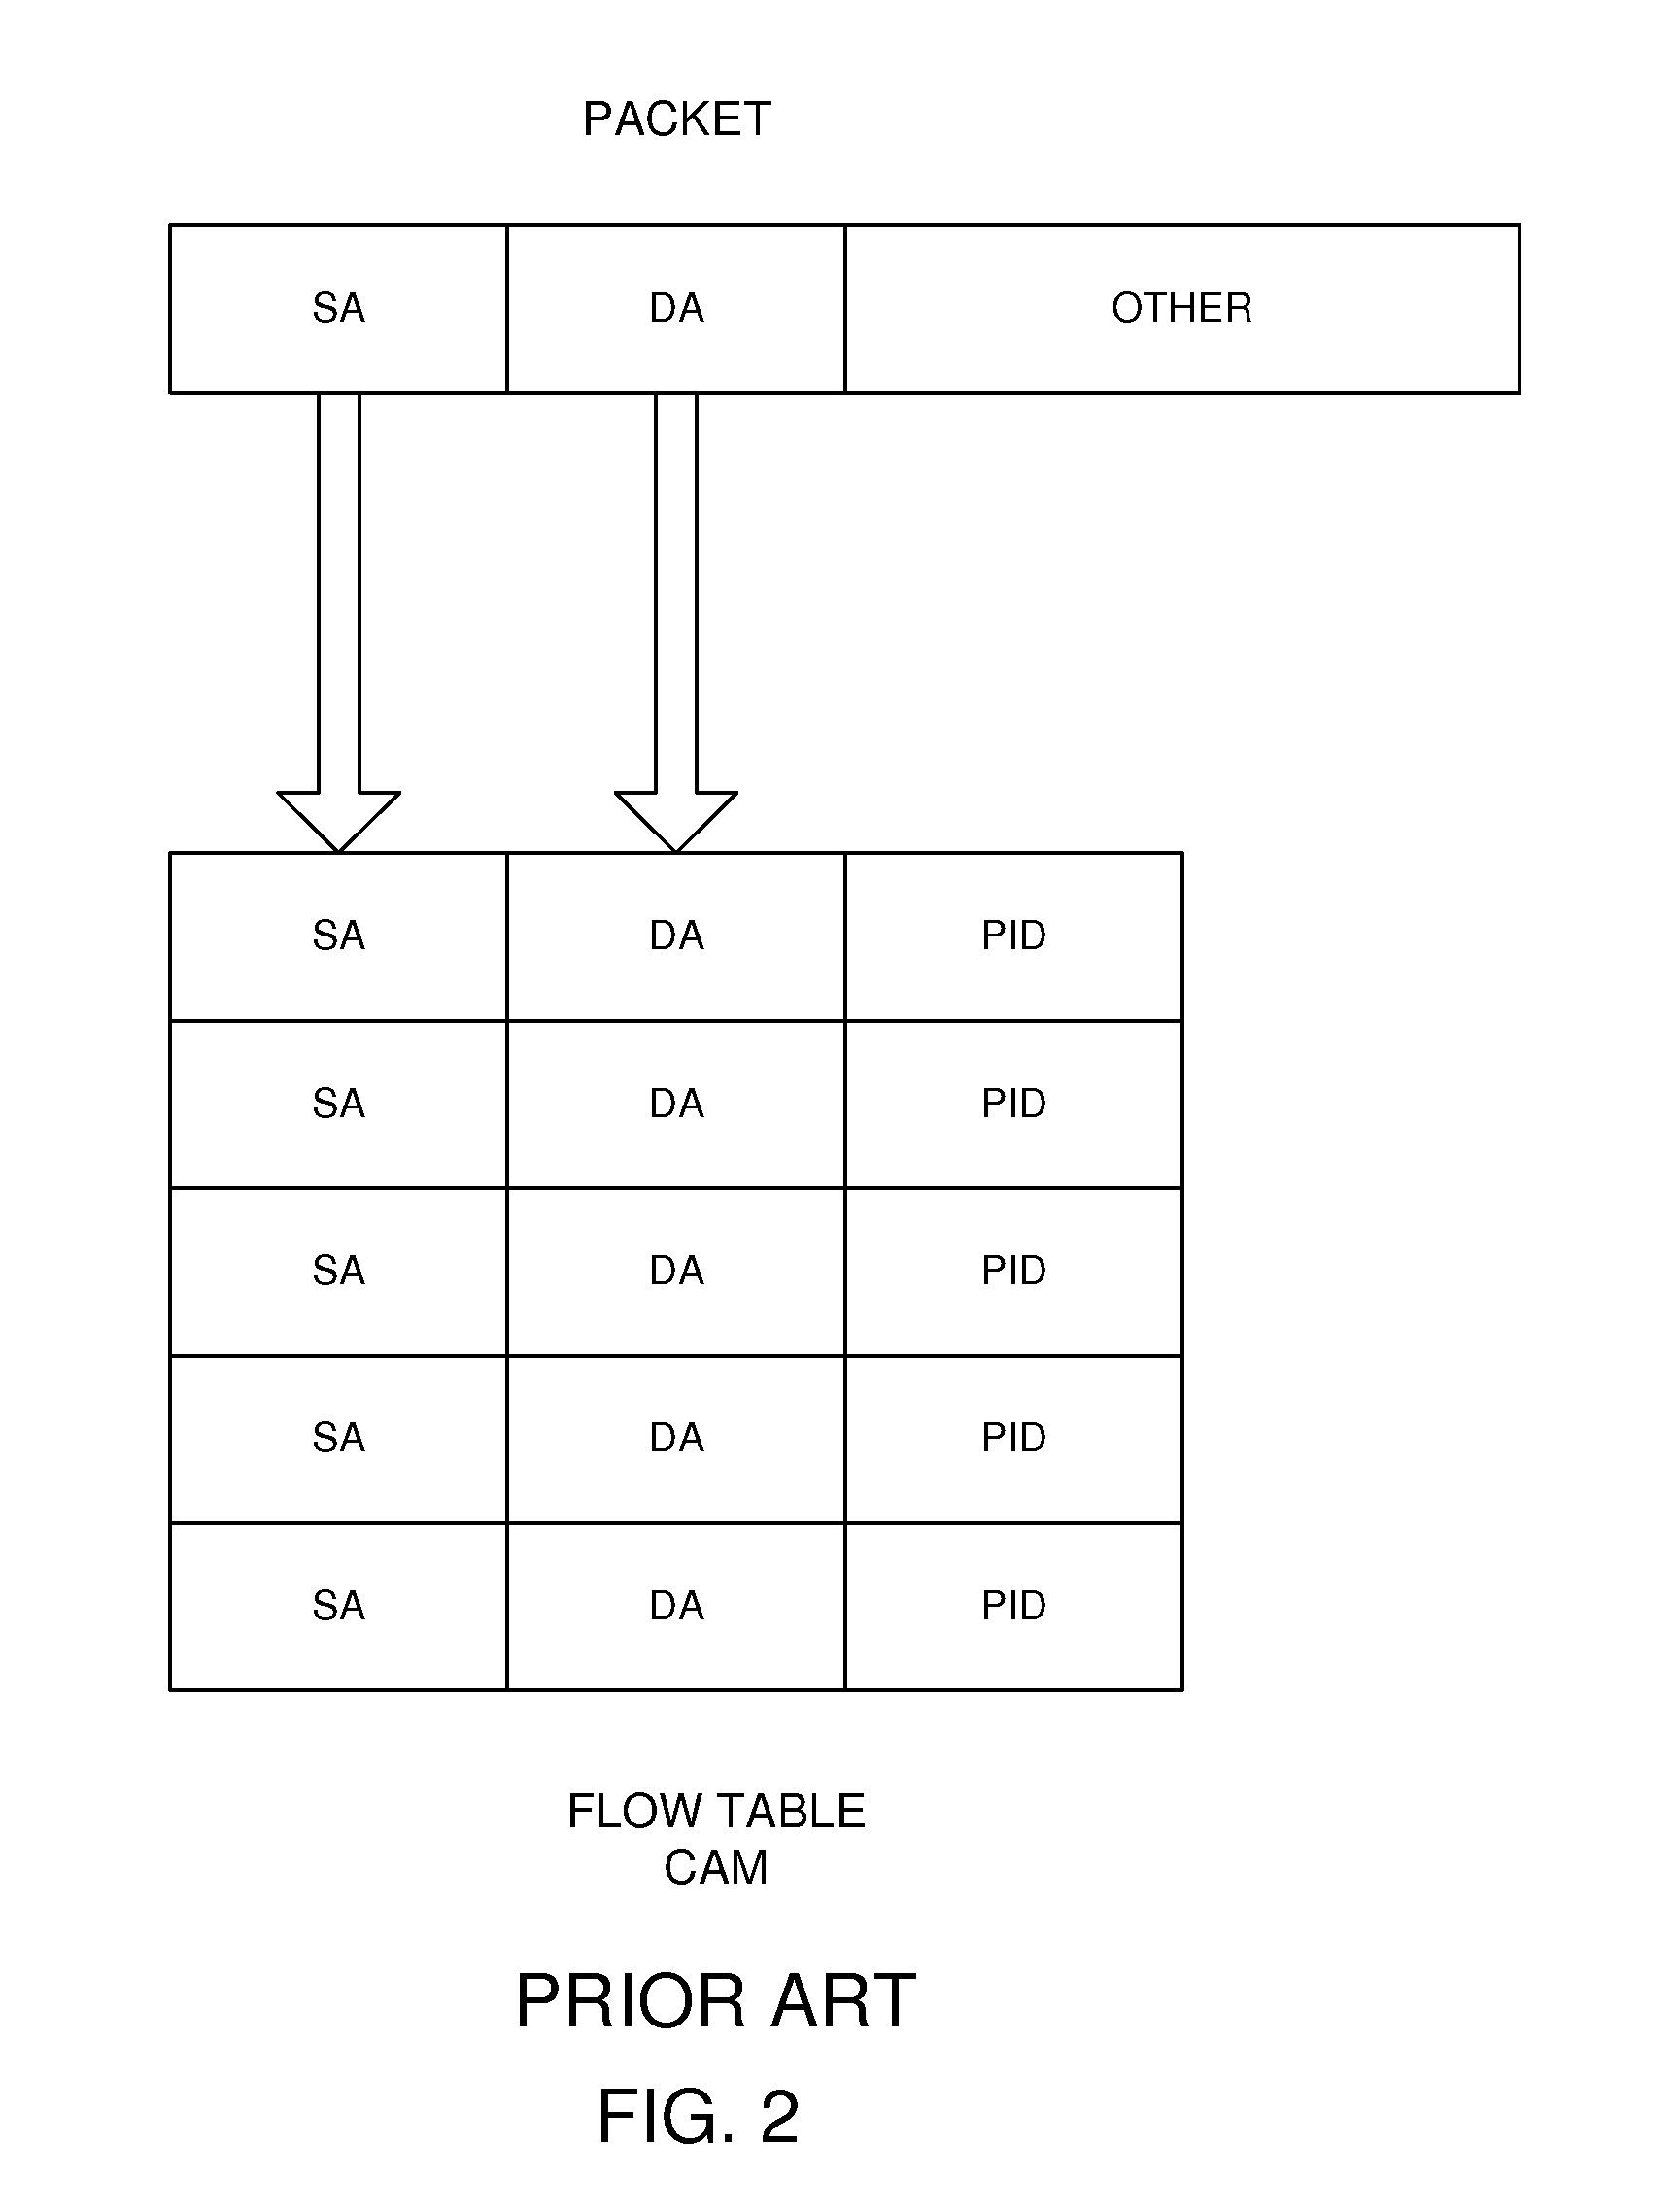 Distribution of flows in a flow-based multi-processor system